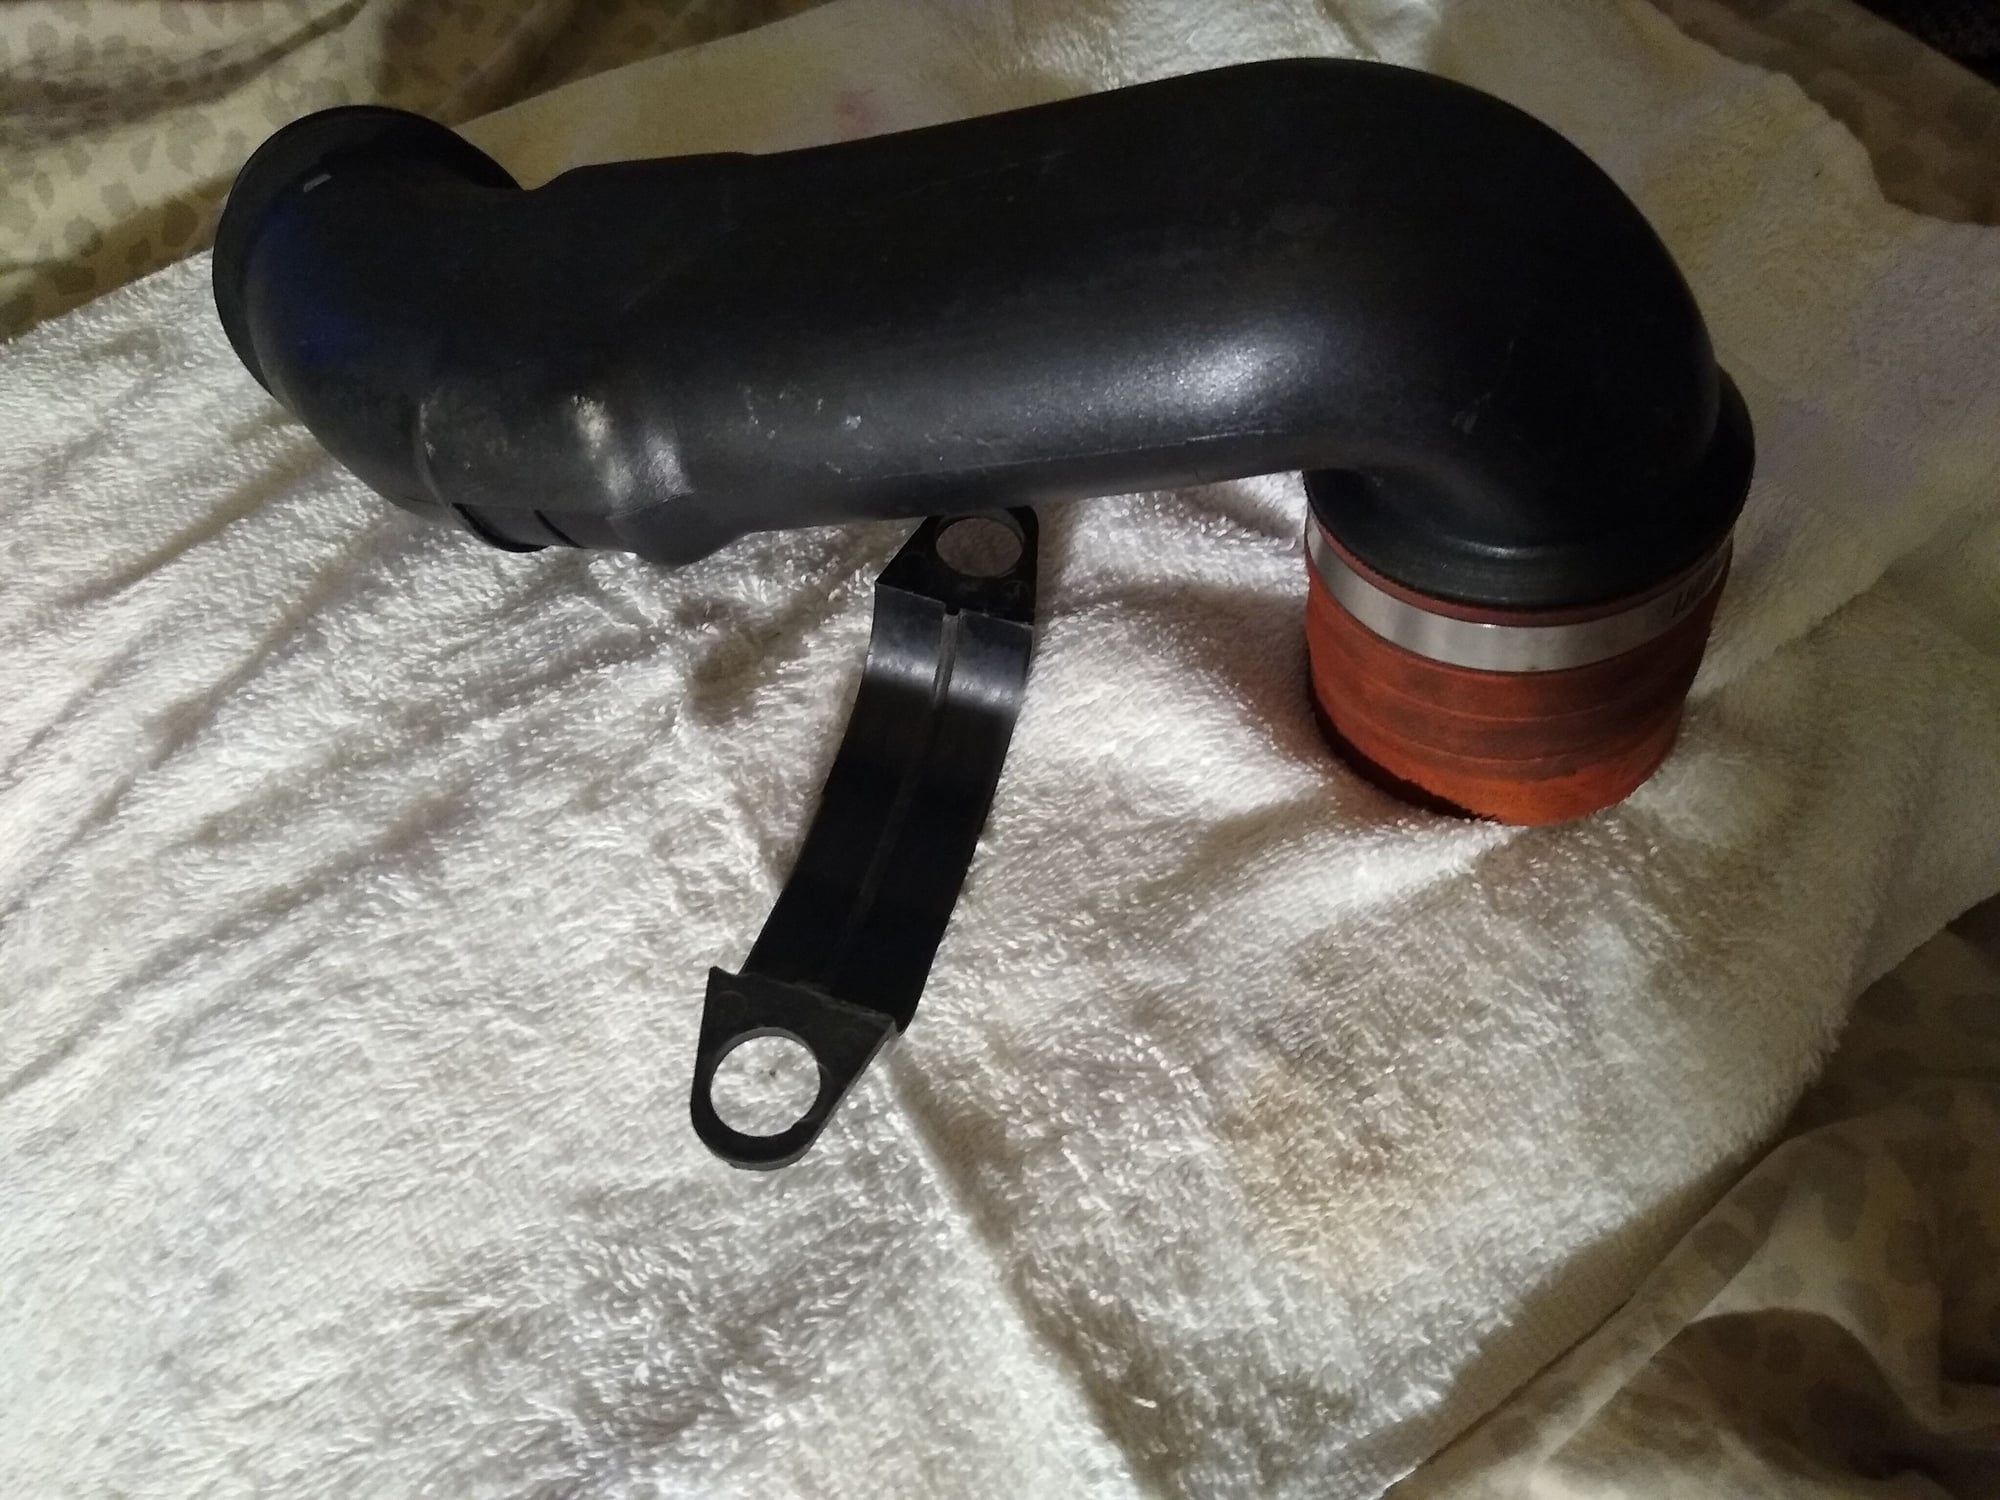 Miscellaneous - FD -  OEM Crossover Pipe - Used - 1993 to 1995 Mazda RX-7 - San Jose, CA 95121, United States